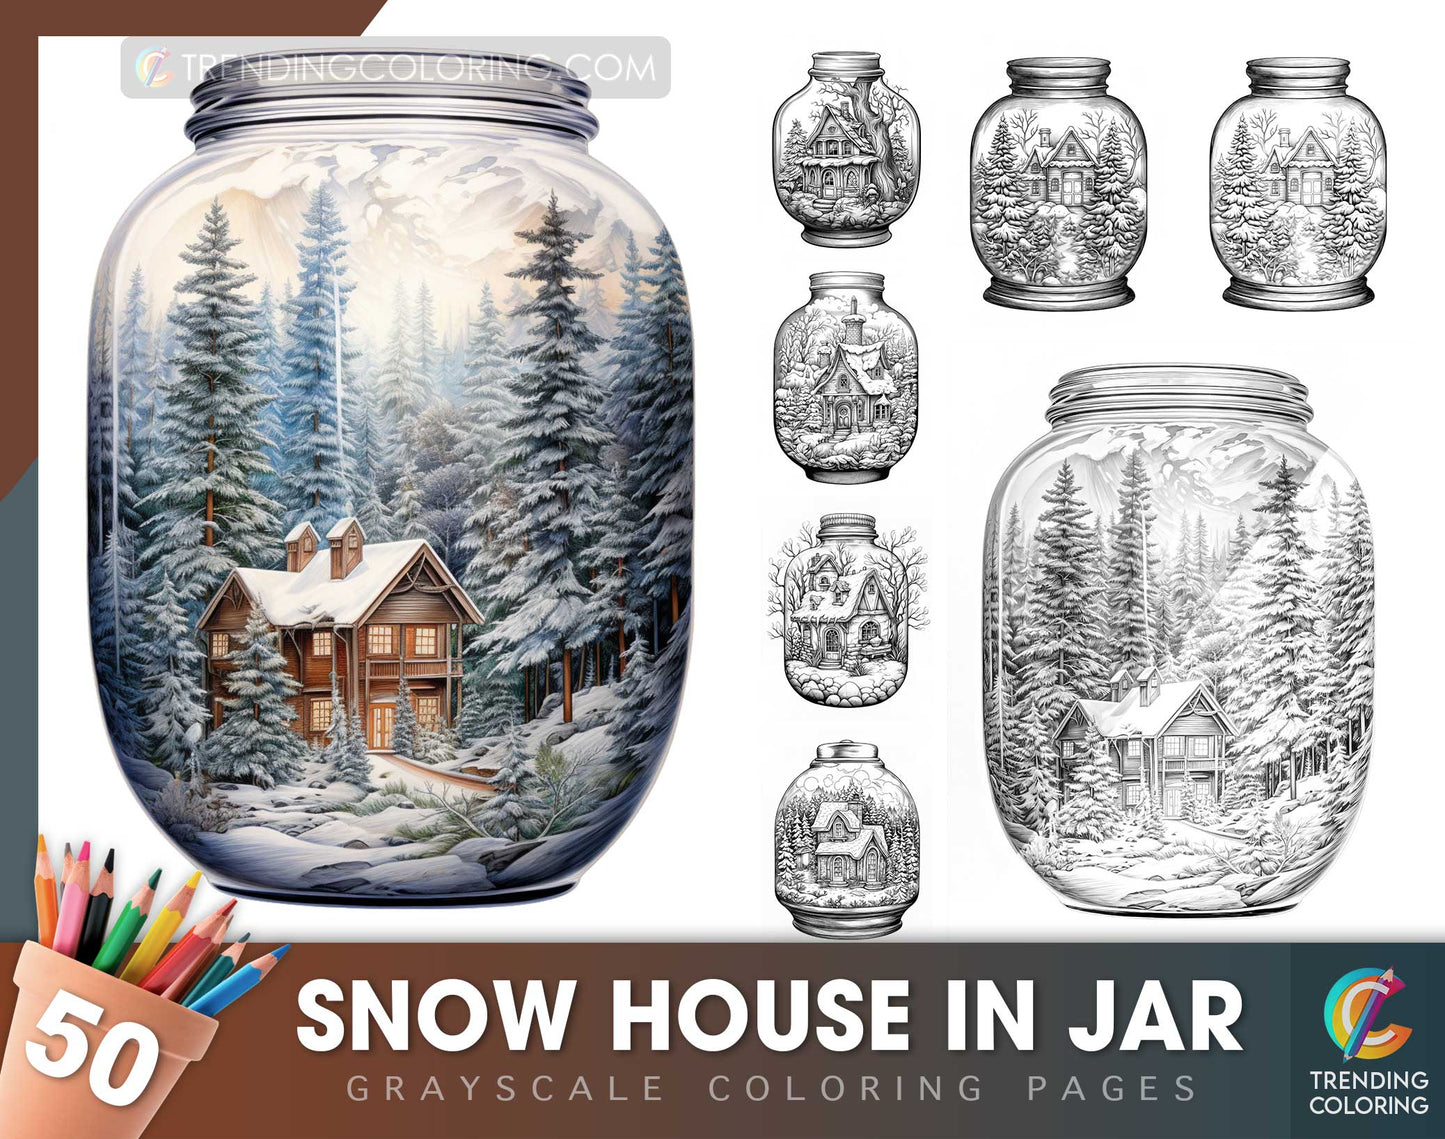 50 Snow House In Jar Grayscale Coloring Pages - Instant Download - Printable Dark/Light